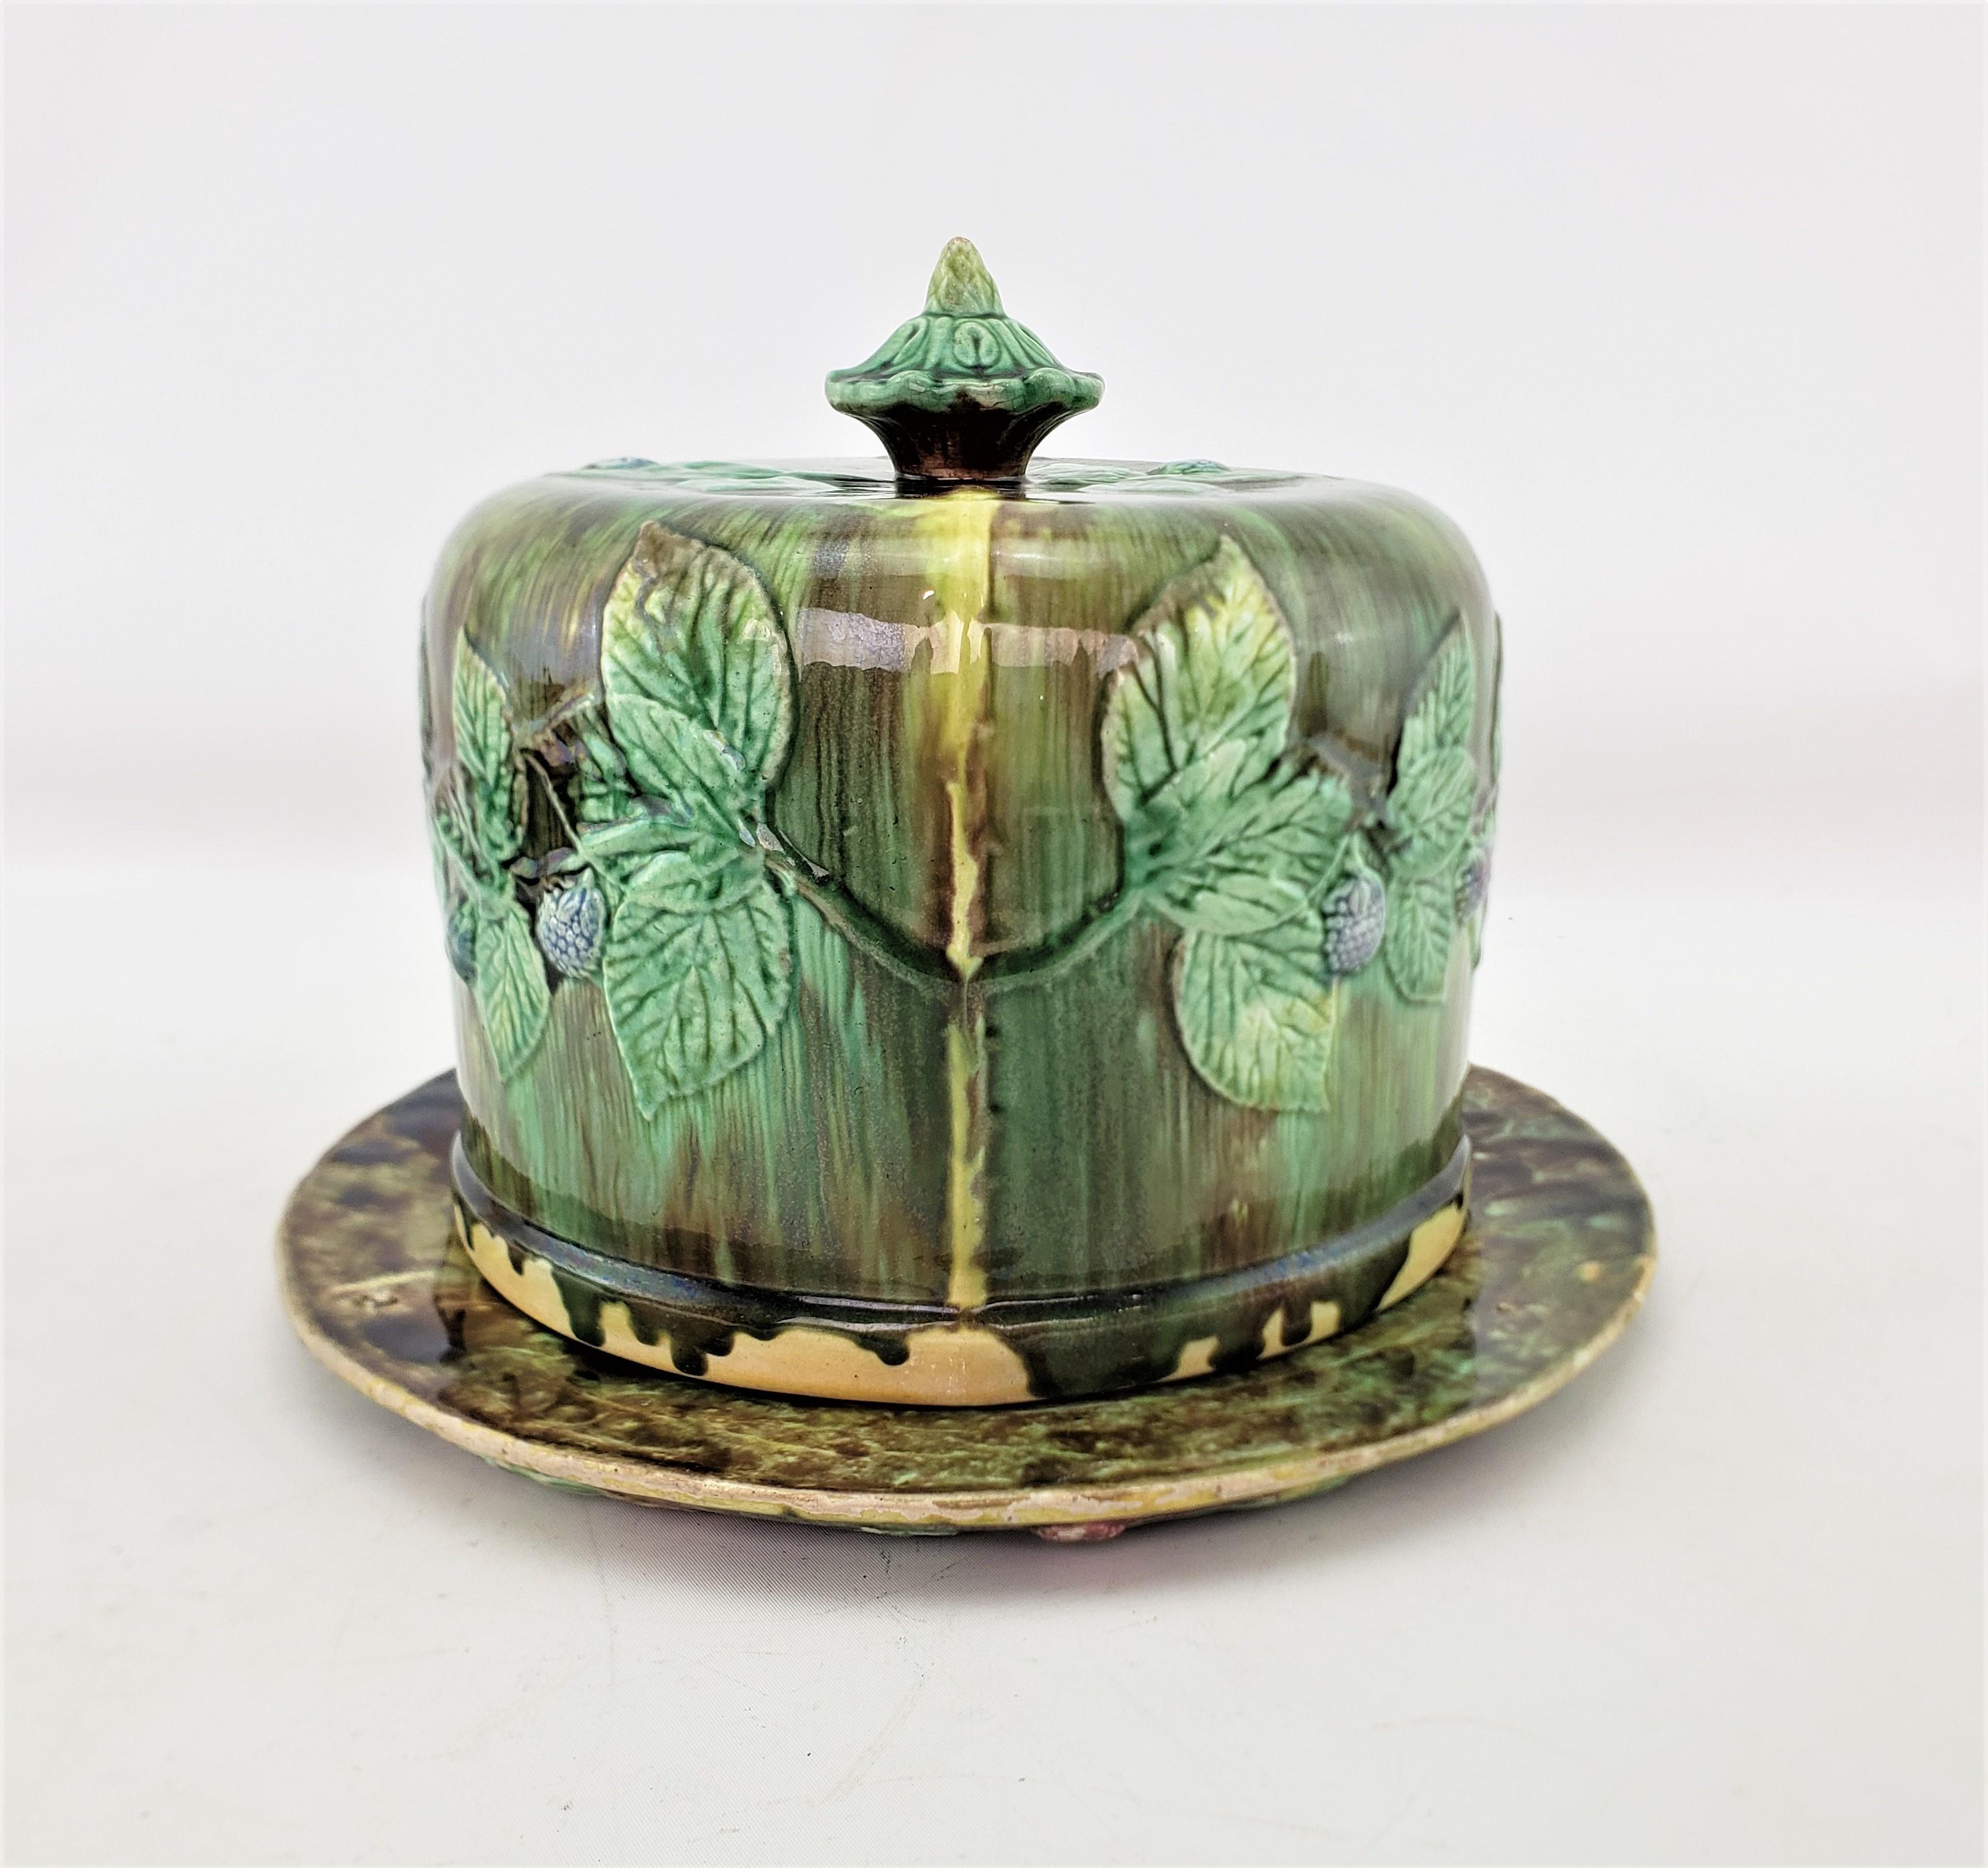 Large Antique Majolica Covered Cheese Server or Dome with Leaf & Berry Decor For Sale 2